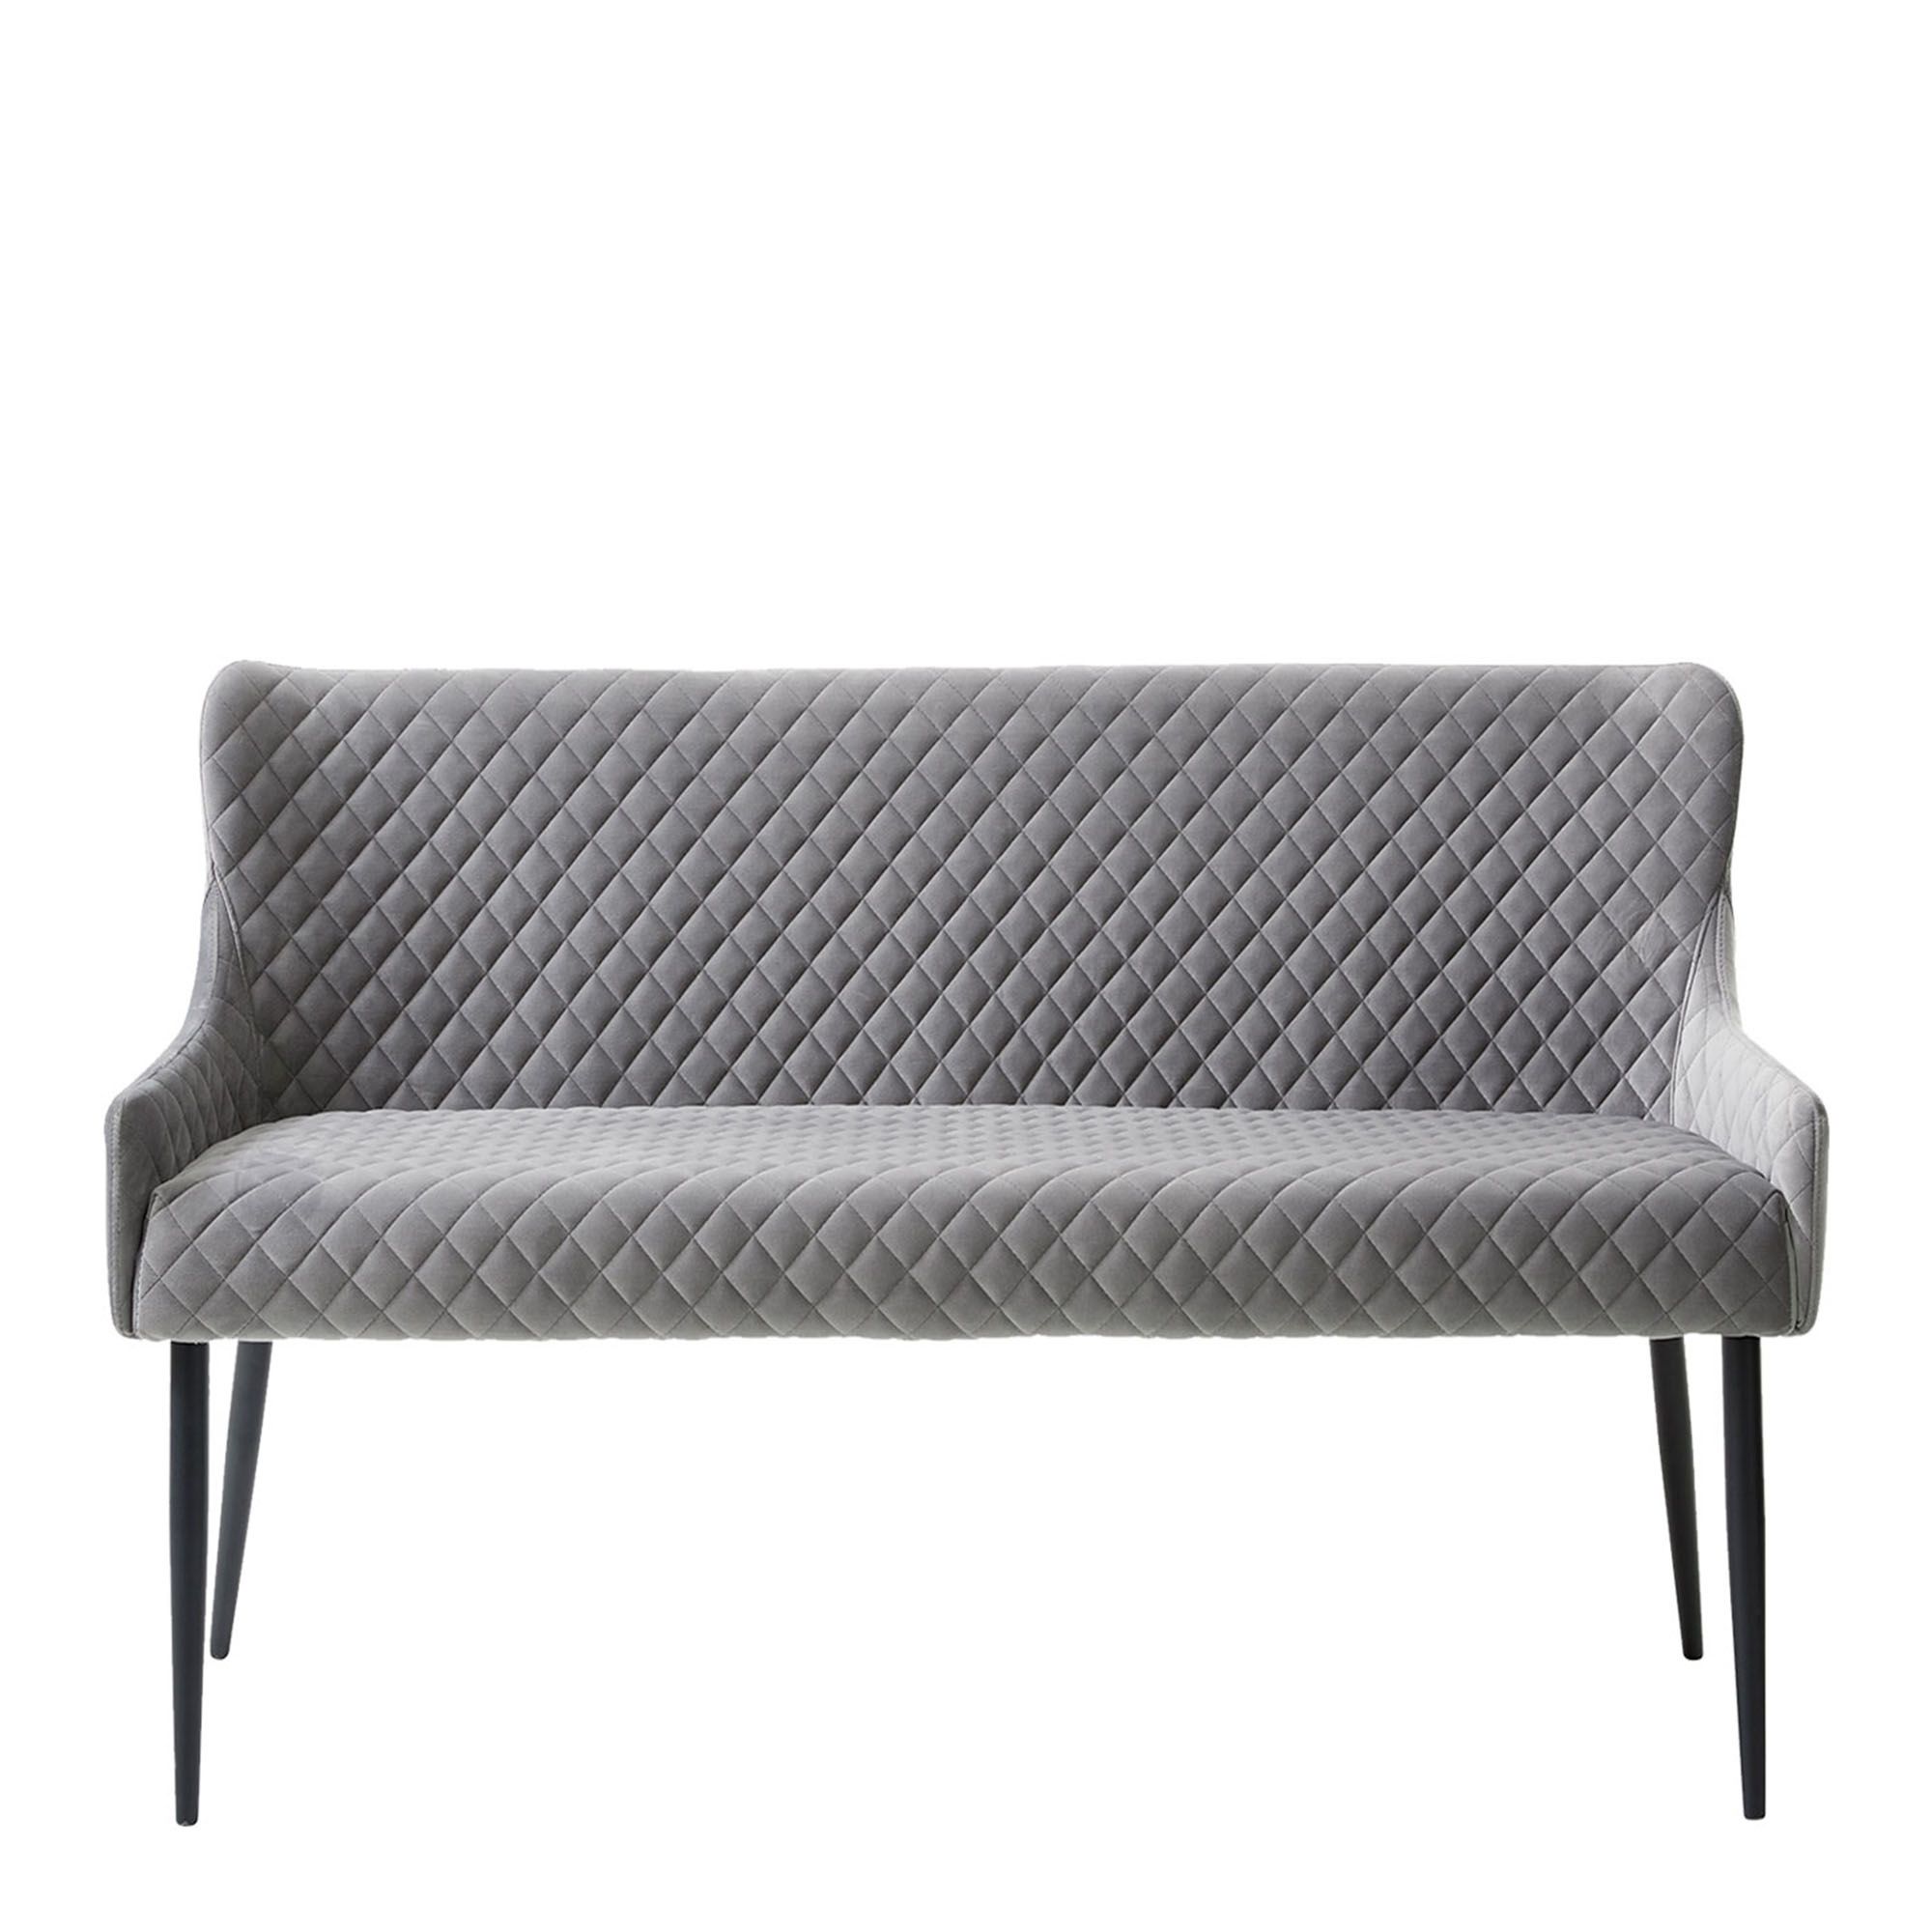 Copeland – Sofa Bench In Grey Velvet Fabric – Dining Chairs – Fishpools Within Rivet Gray Velvet Fabric Bench (View 19 of 20)